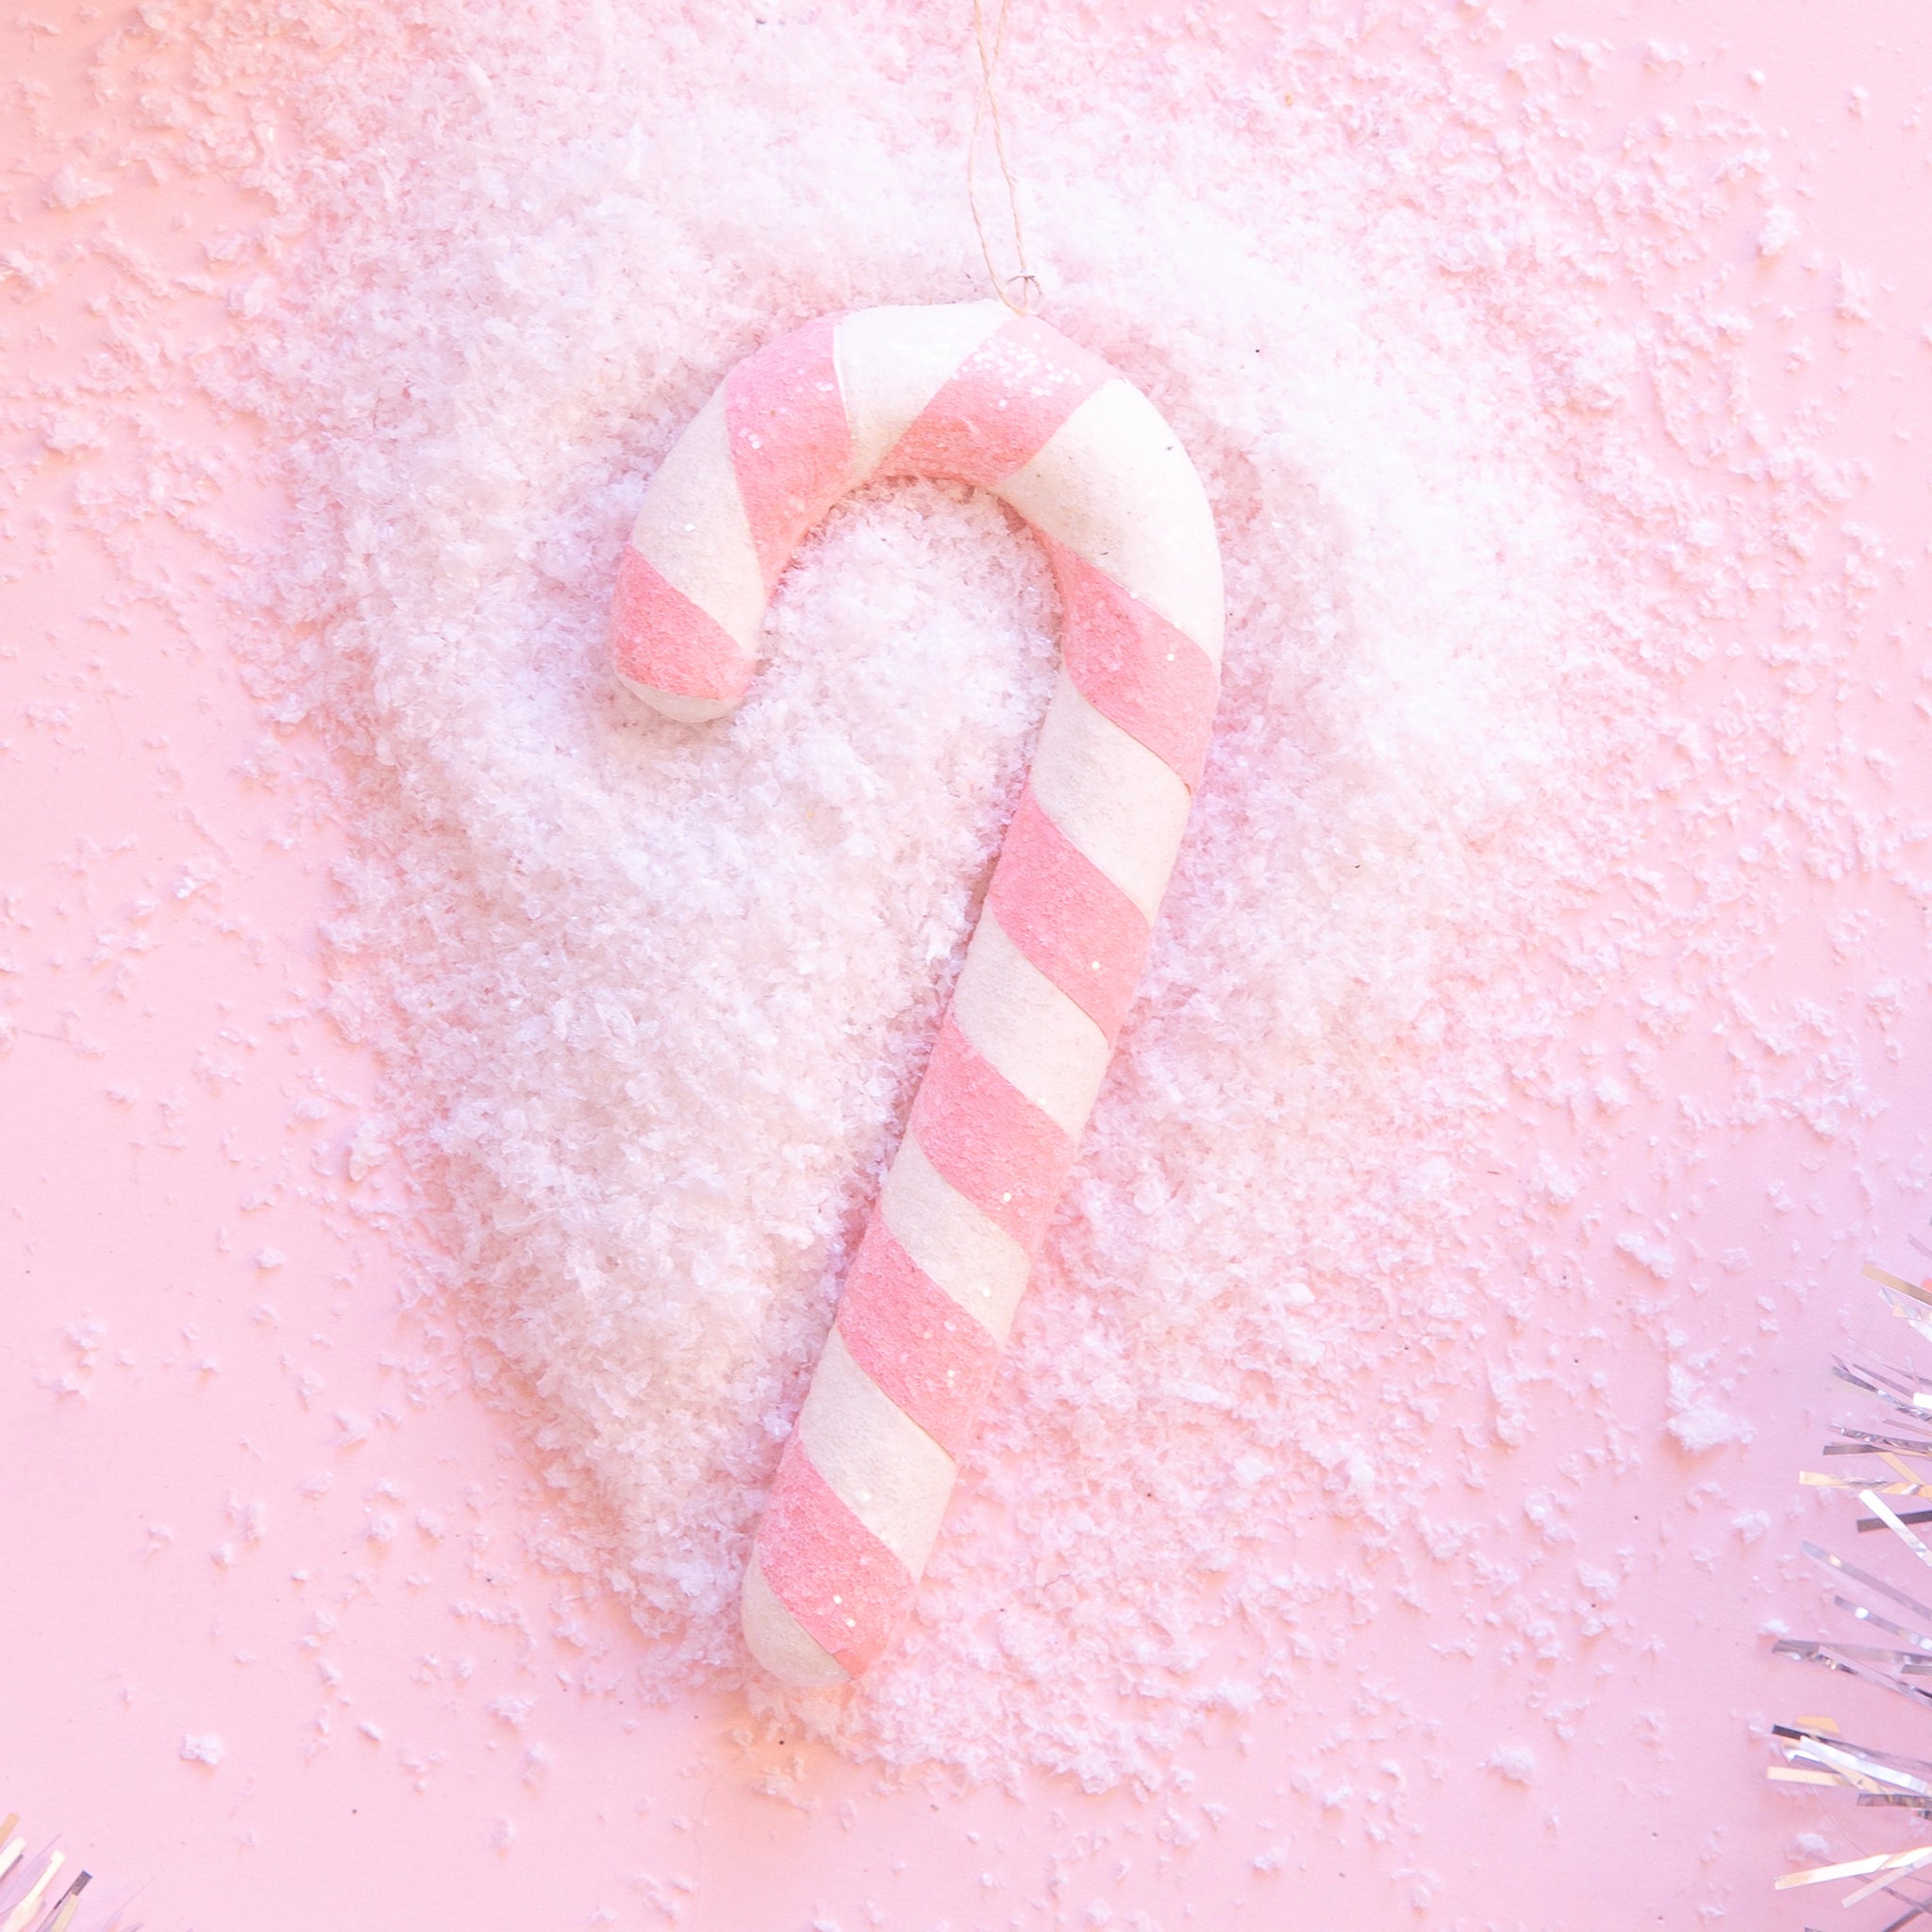 On a pink background is a light pink and white candy cane ornament.